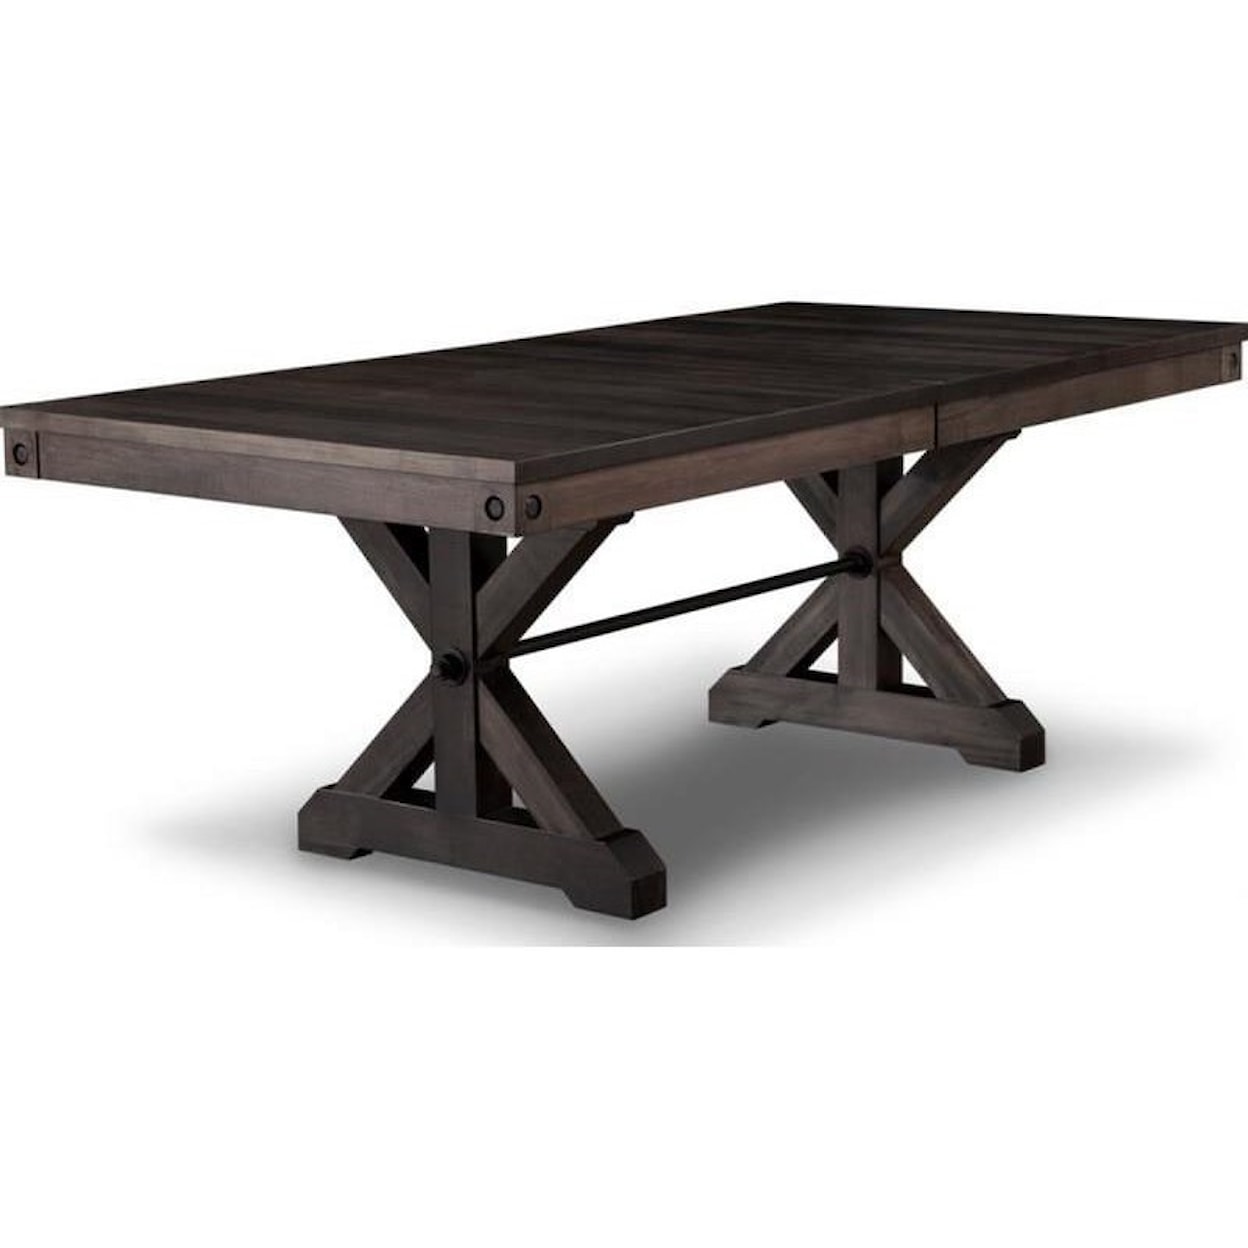 Handstone Rafters 42x72 Trestle Table